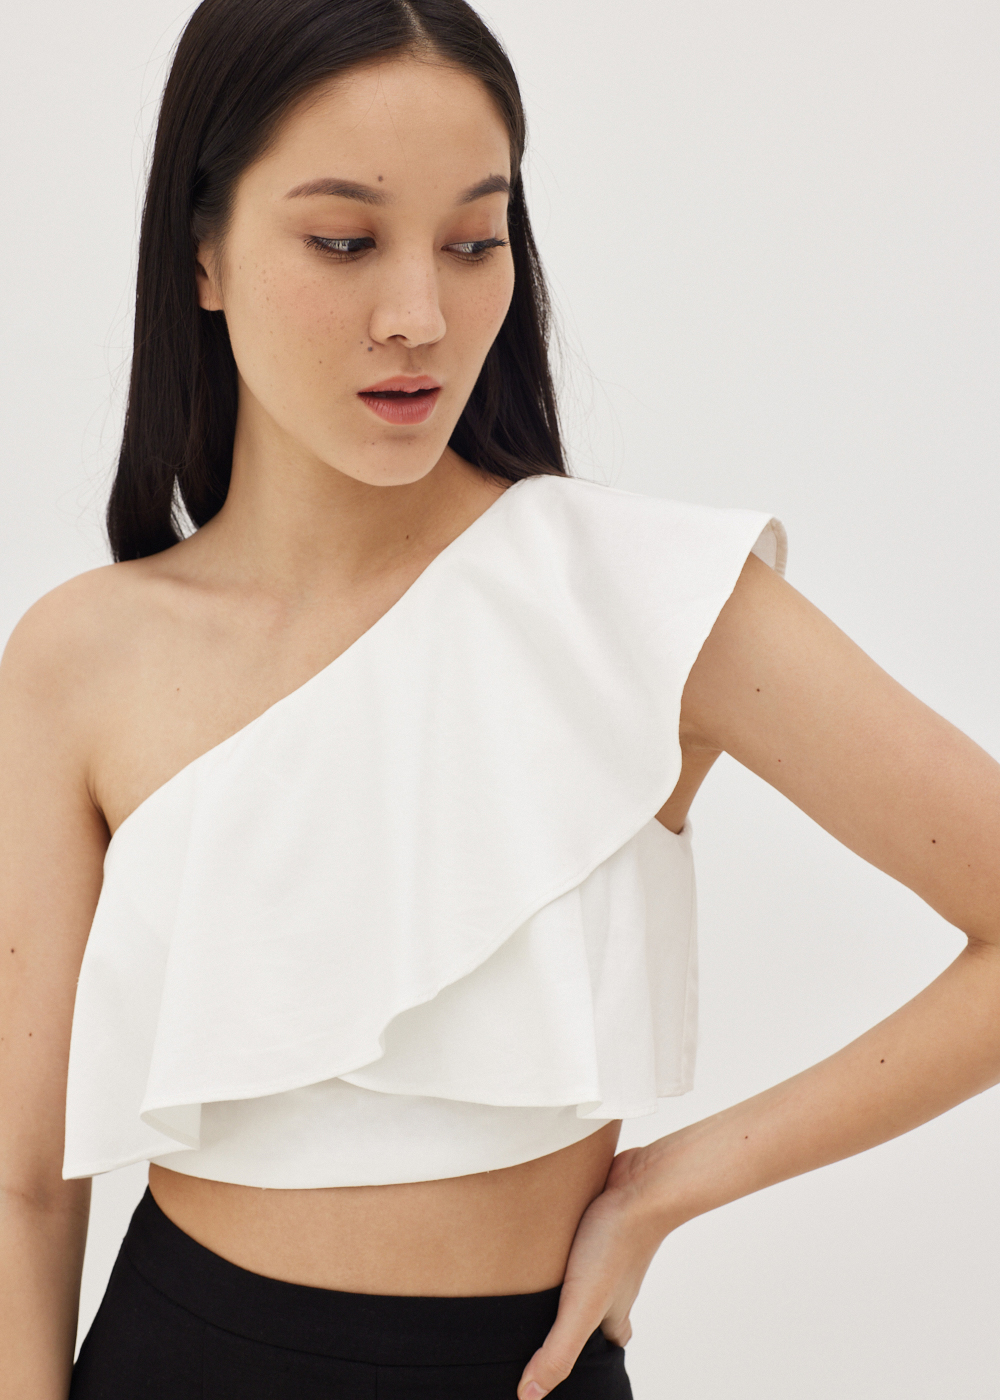 Buy Naura Linen Fitted Toga Top @ Love, Bonito Singapore | Shop Women's ...